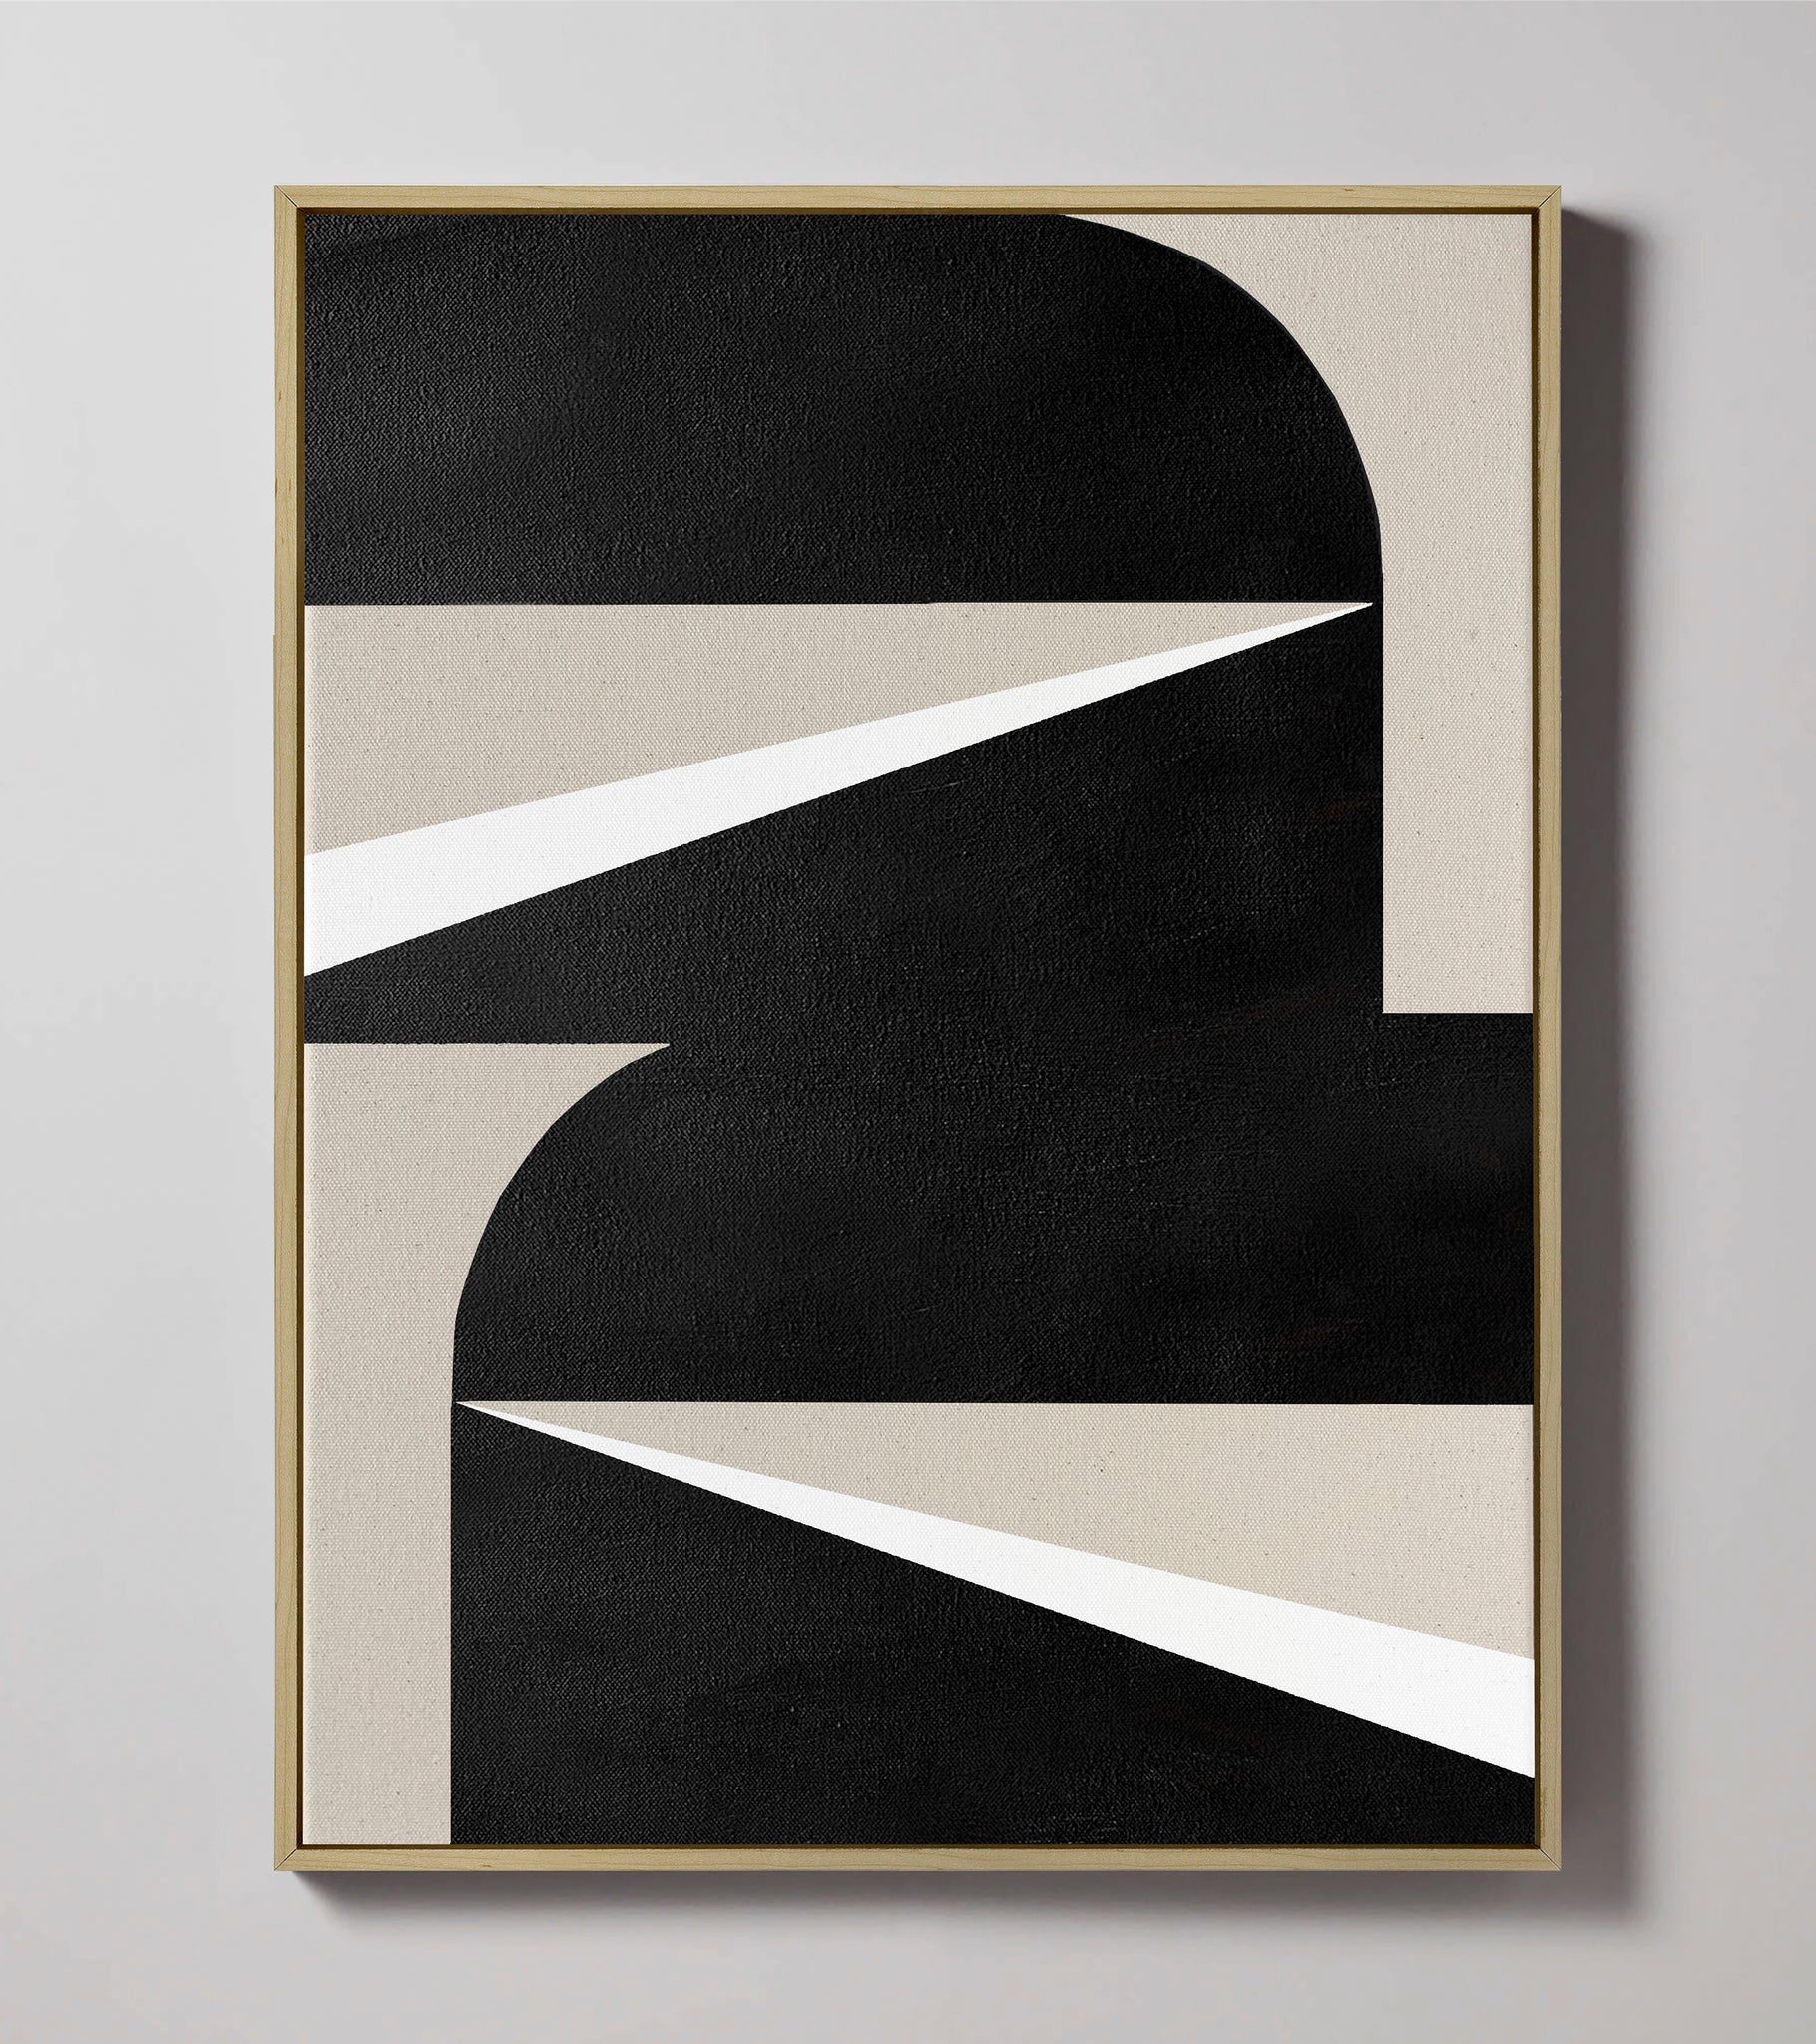 Set of Two - "Abstract Black & White Graphic No. 1 & 2" - Midcentury Modern Canvas Painting